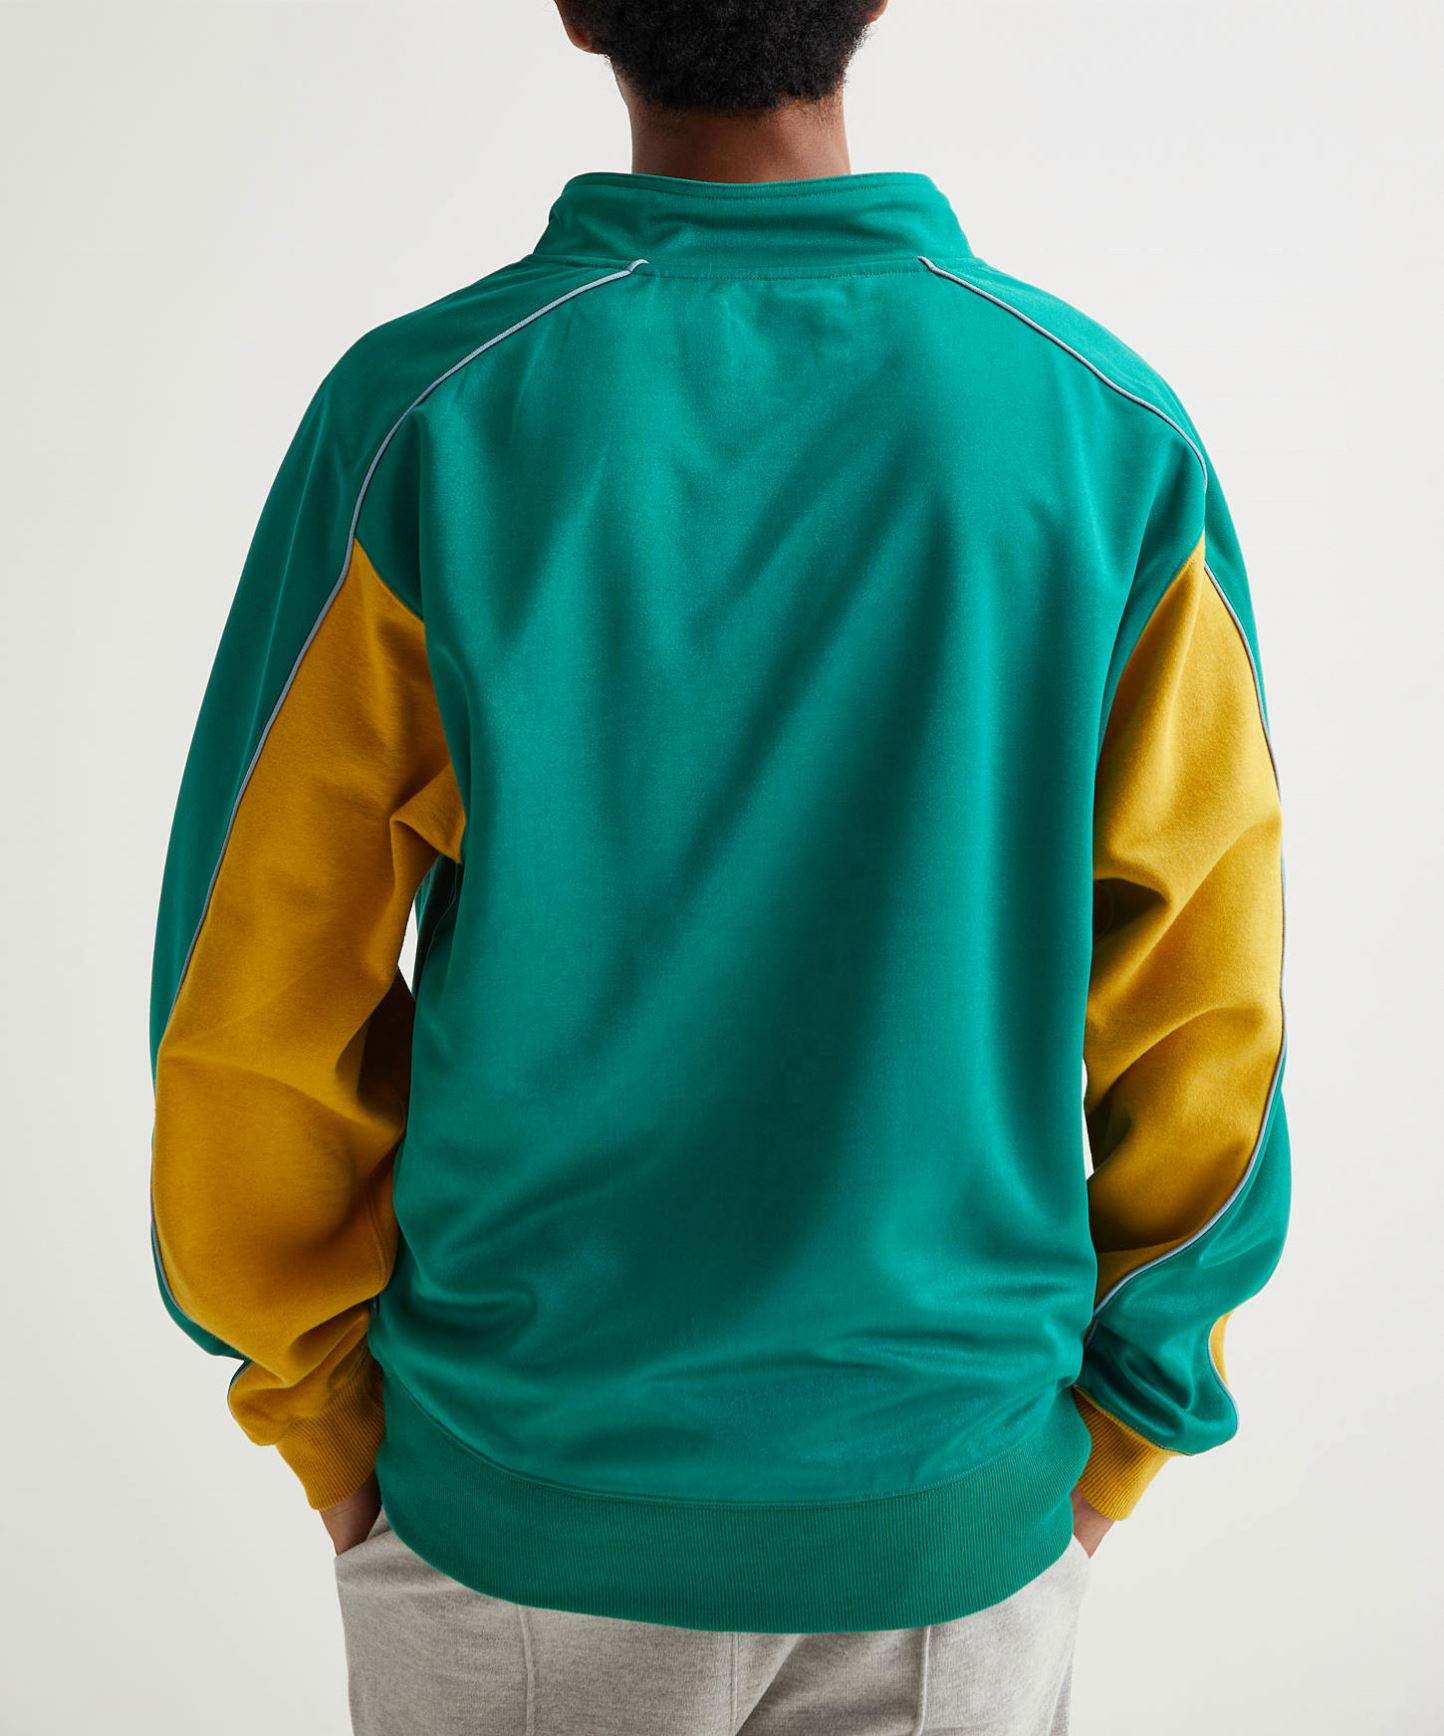 OEM Manufacturer Contrast Sleeve Color Piping Green Color High Quality Polyester Mock Neck Drawstring Hoodies Sweatshirts